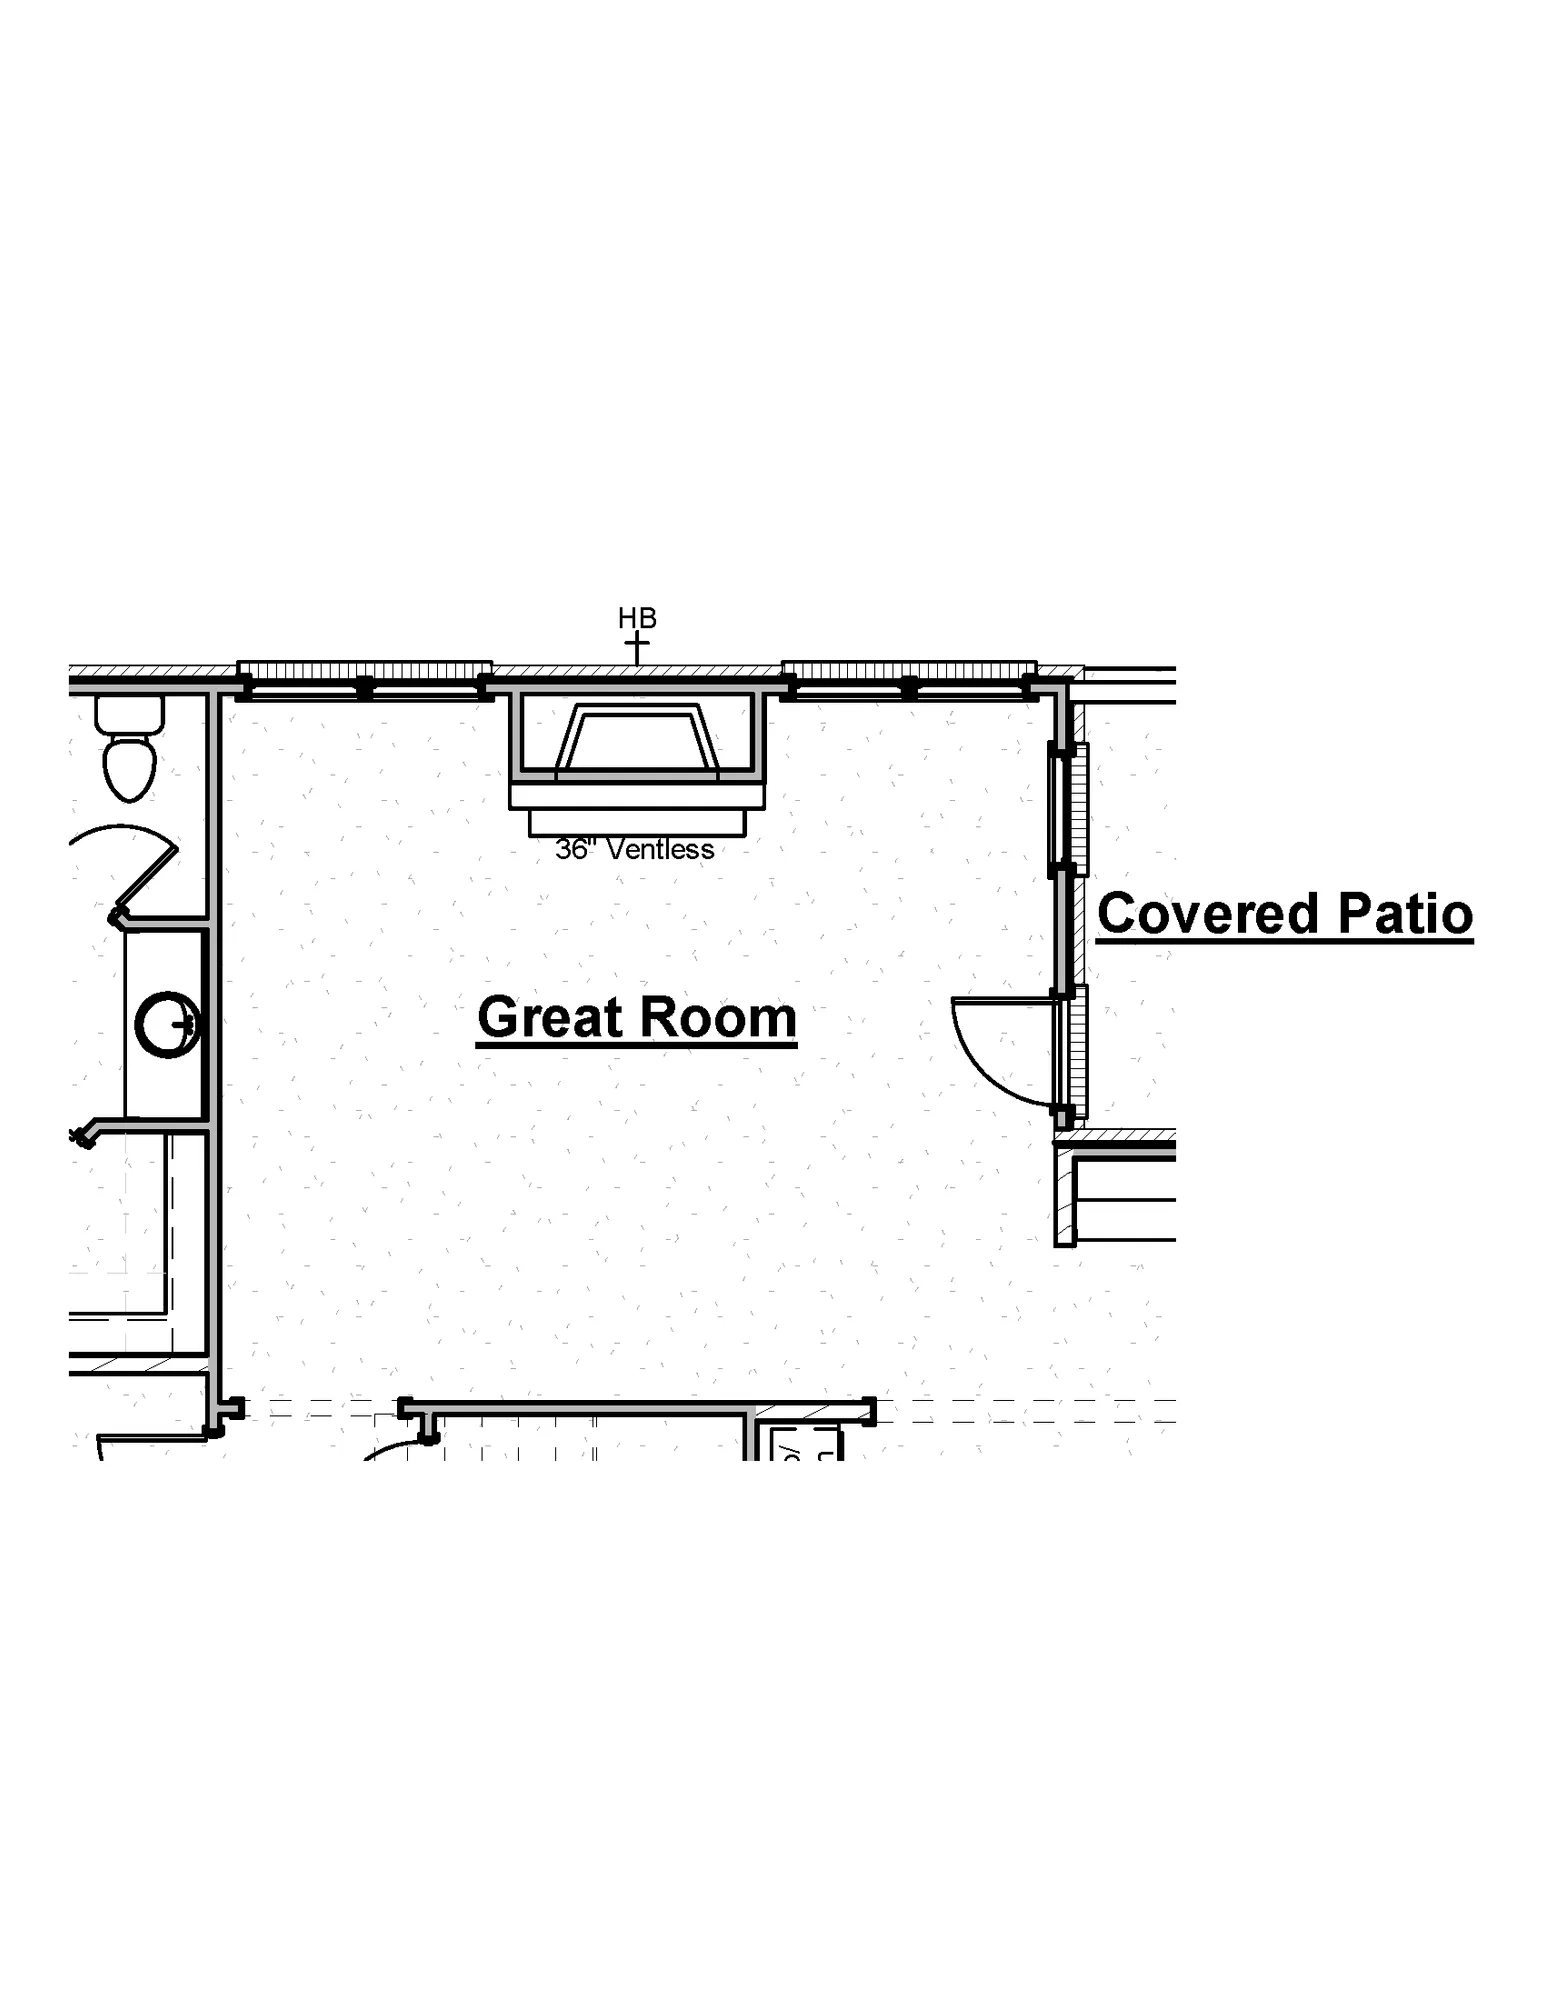 Great Room Fireplace Bump-In - undefined